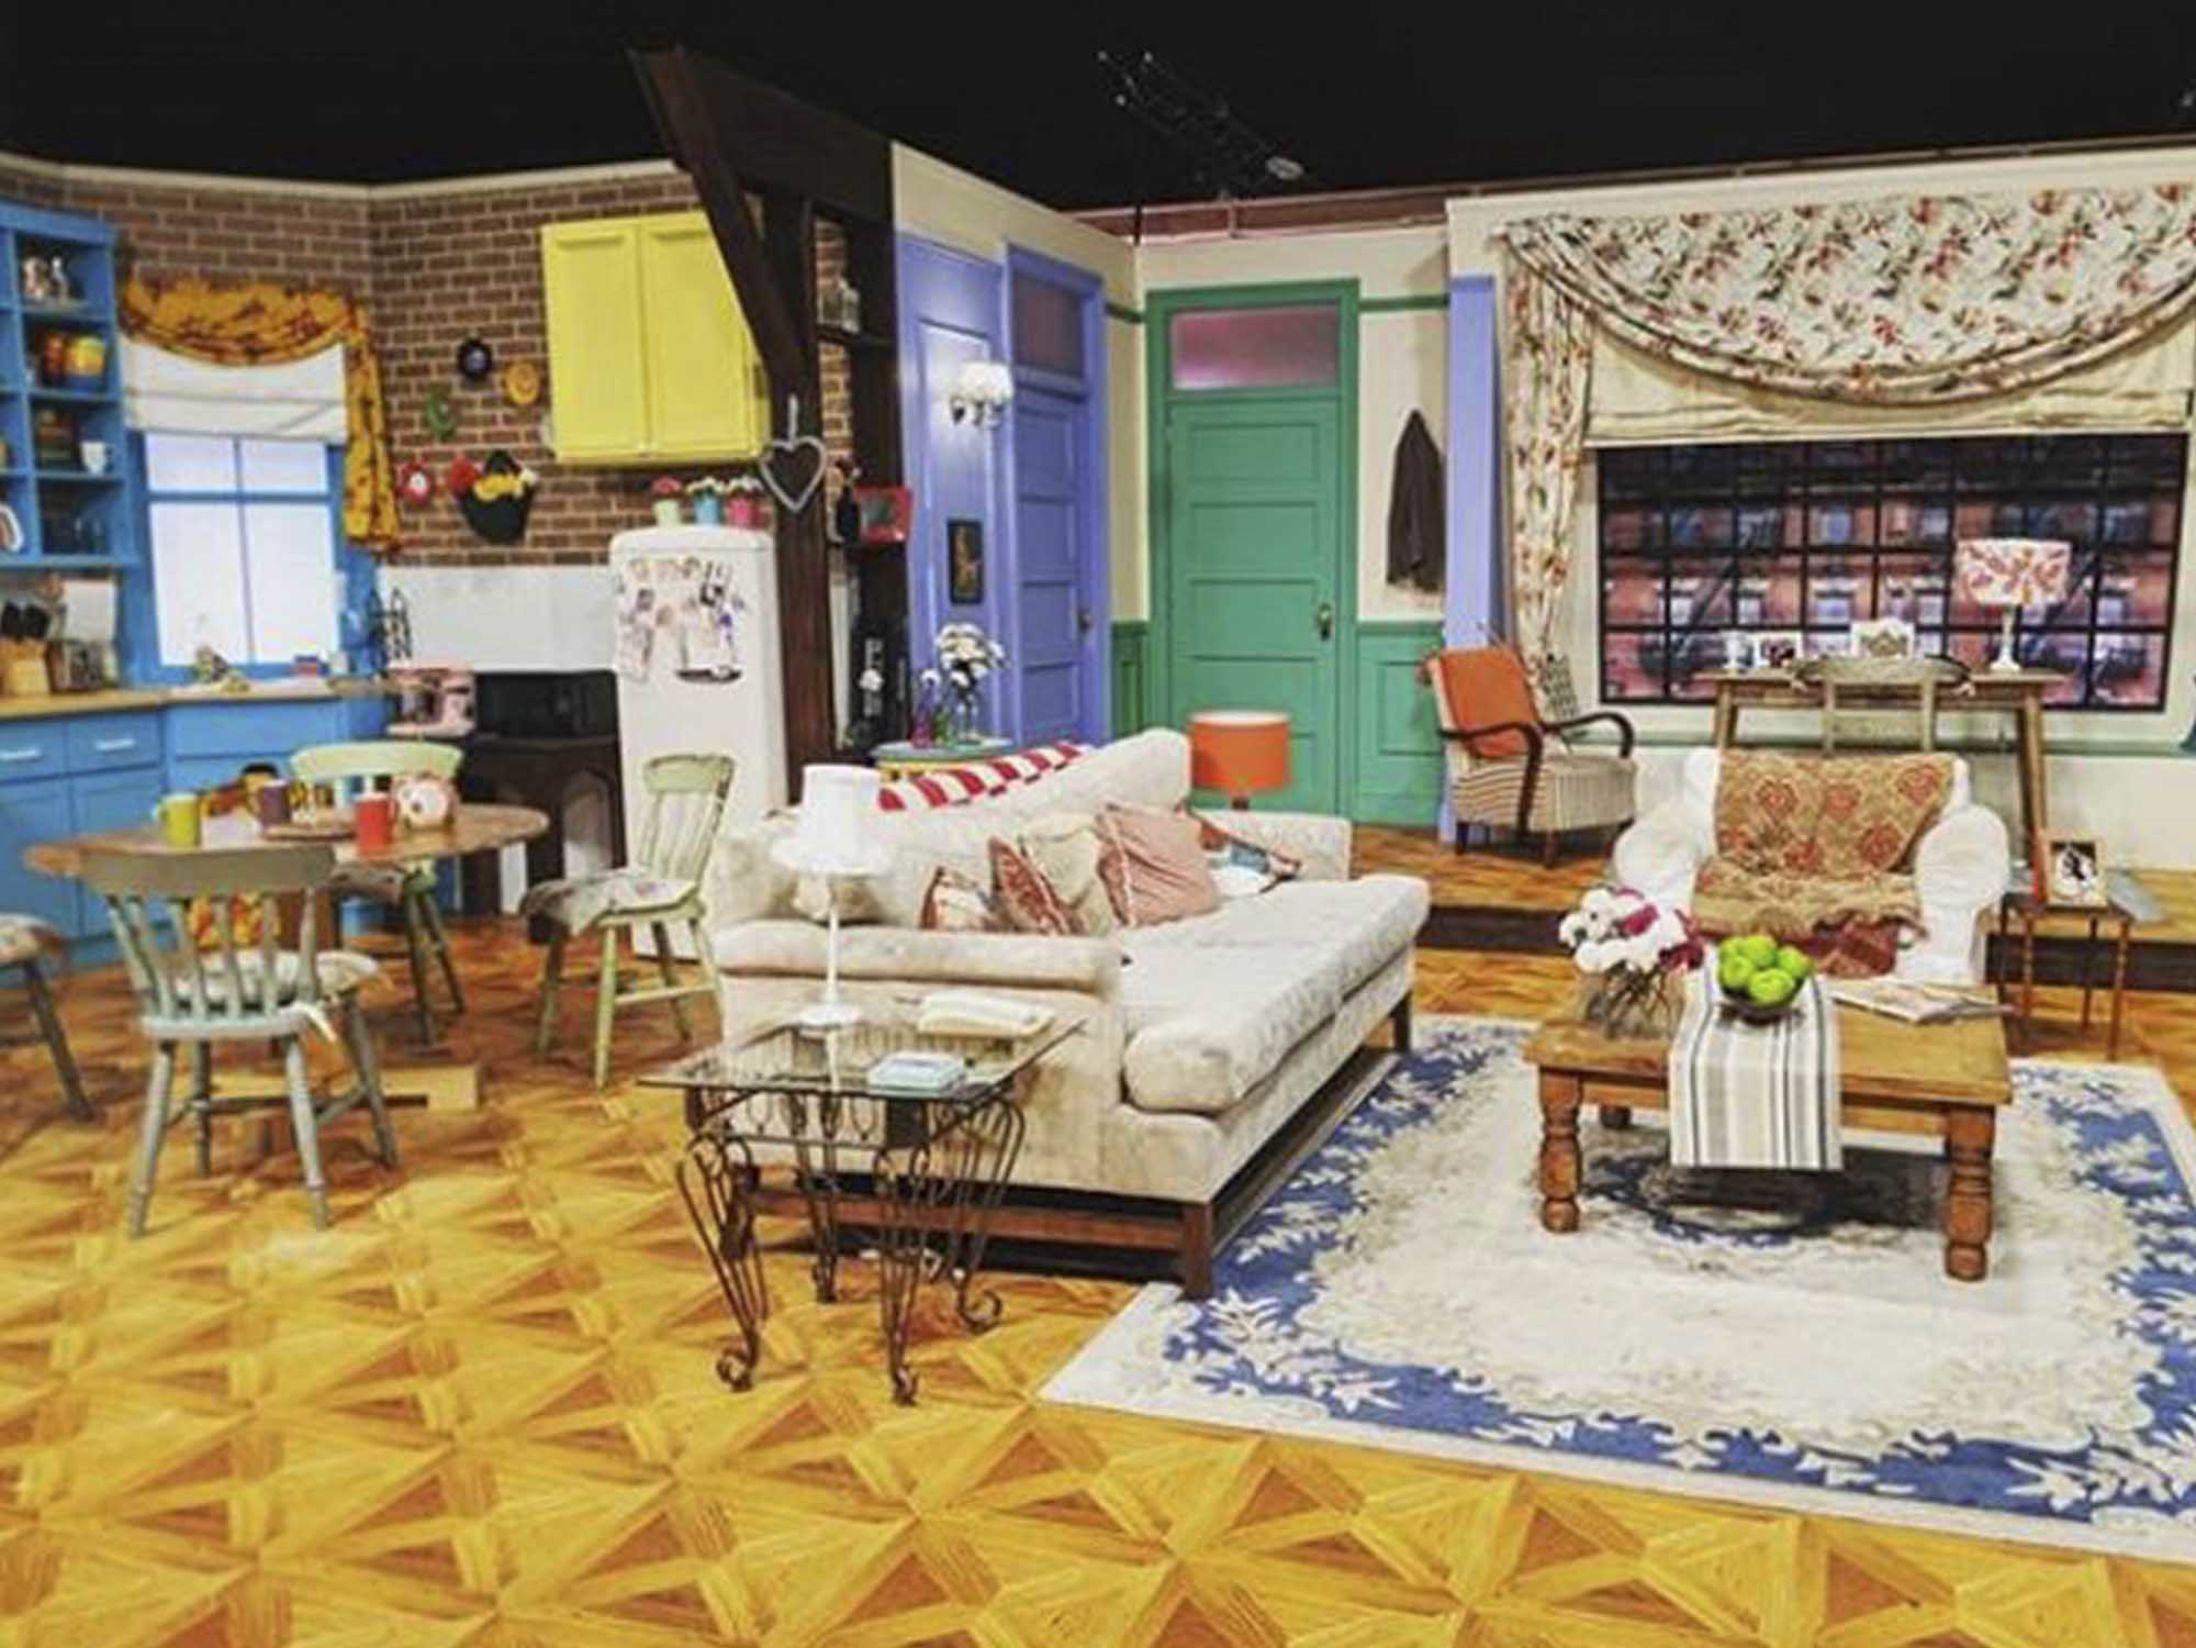 Manchester Events to Know About - FriendsFest